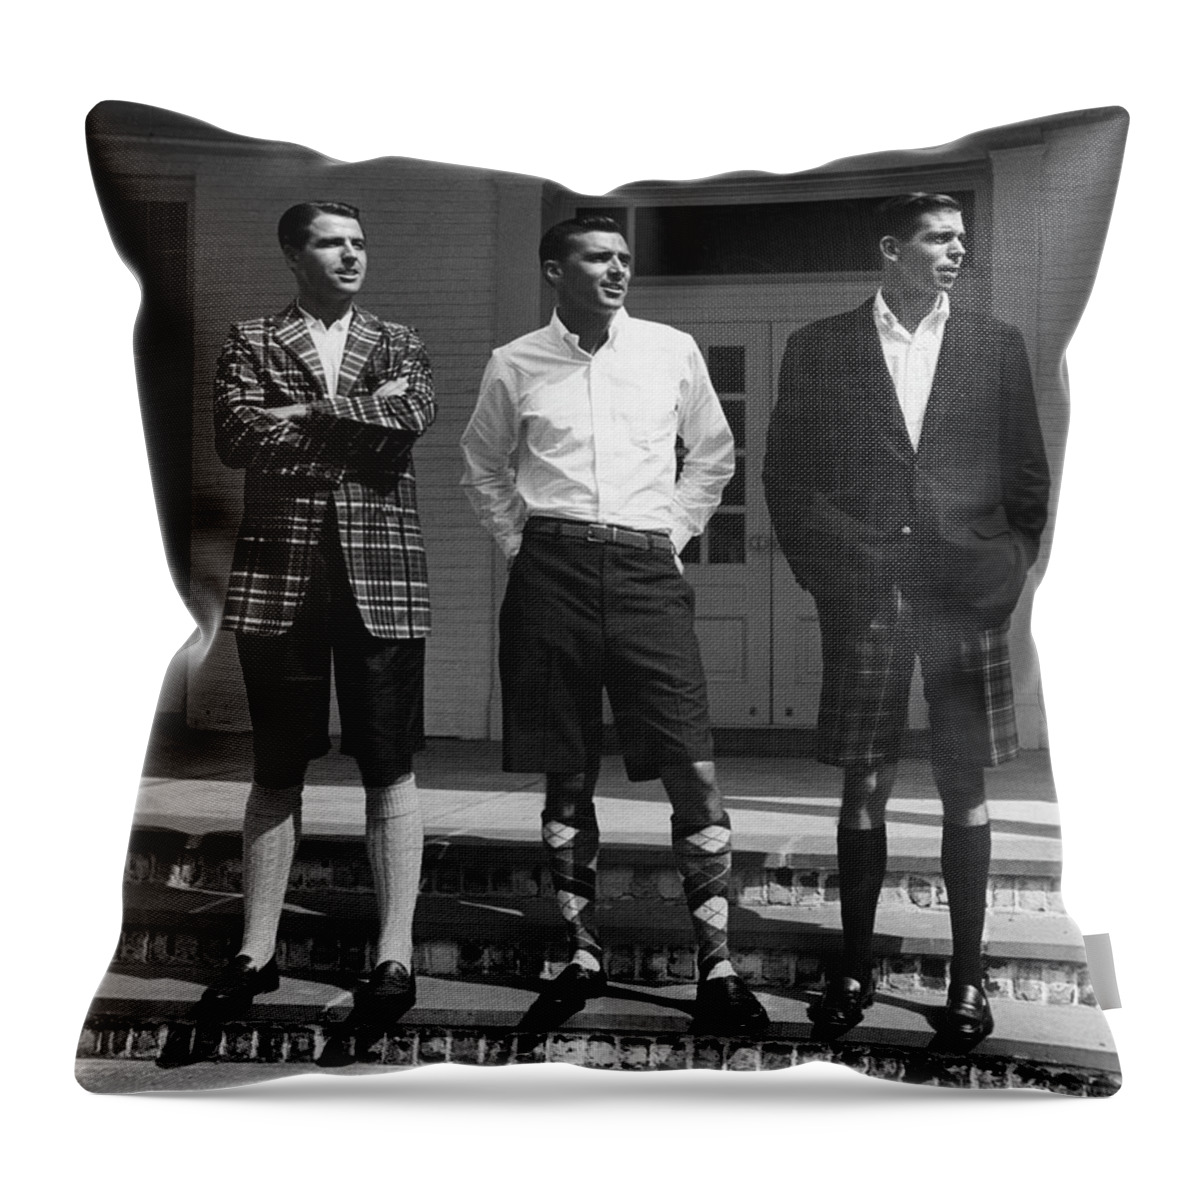 Bermuda Throw Pillow featuring the photograph Men In Bermuda Shorts by Alfred Eisenstaedt